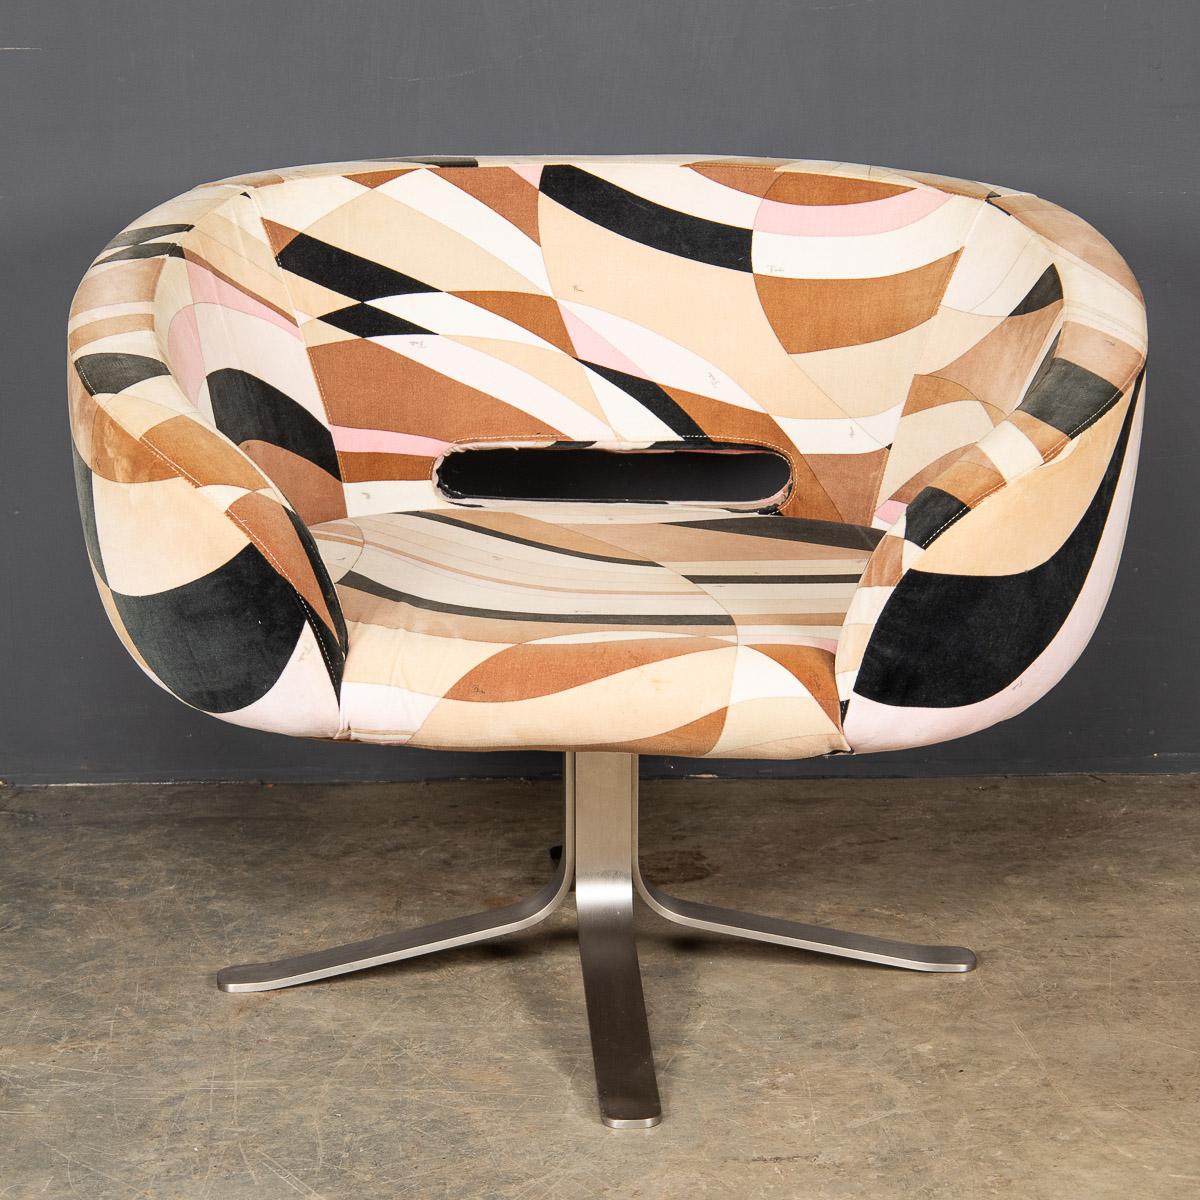 An over sized swivel chair with brushed steel legs and plush pucci velvet upholstery. This chair is a collaboration between Patrick Norguet, French furniture designer, Emilio Pucci, Italian fabric designer and Giulio Cappellini producer of such